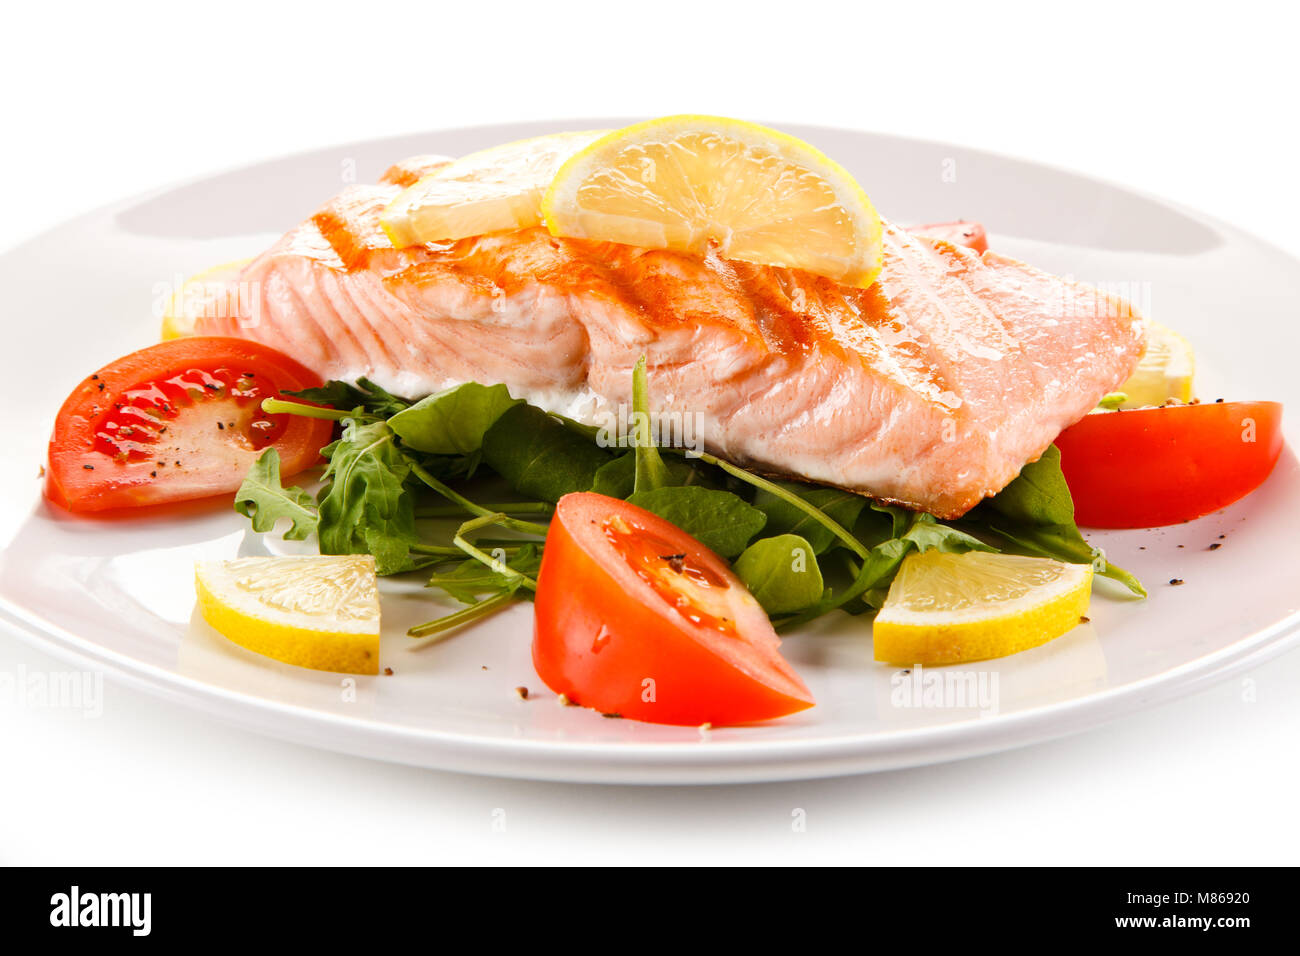 Grilled salmon and vegetables Stock Photo